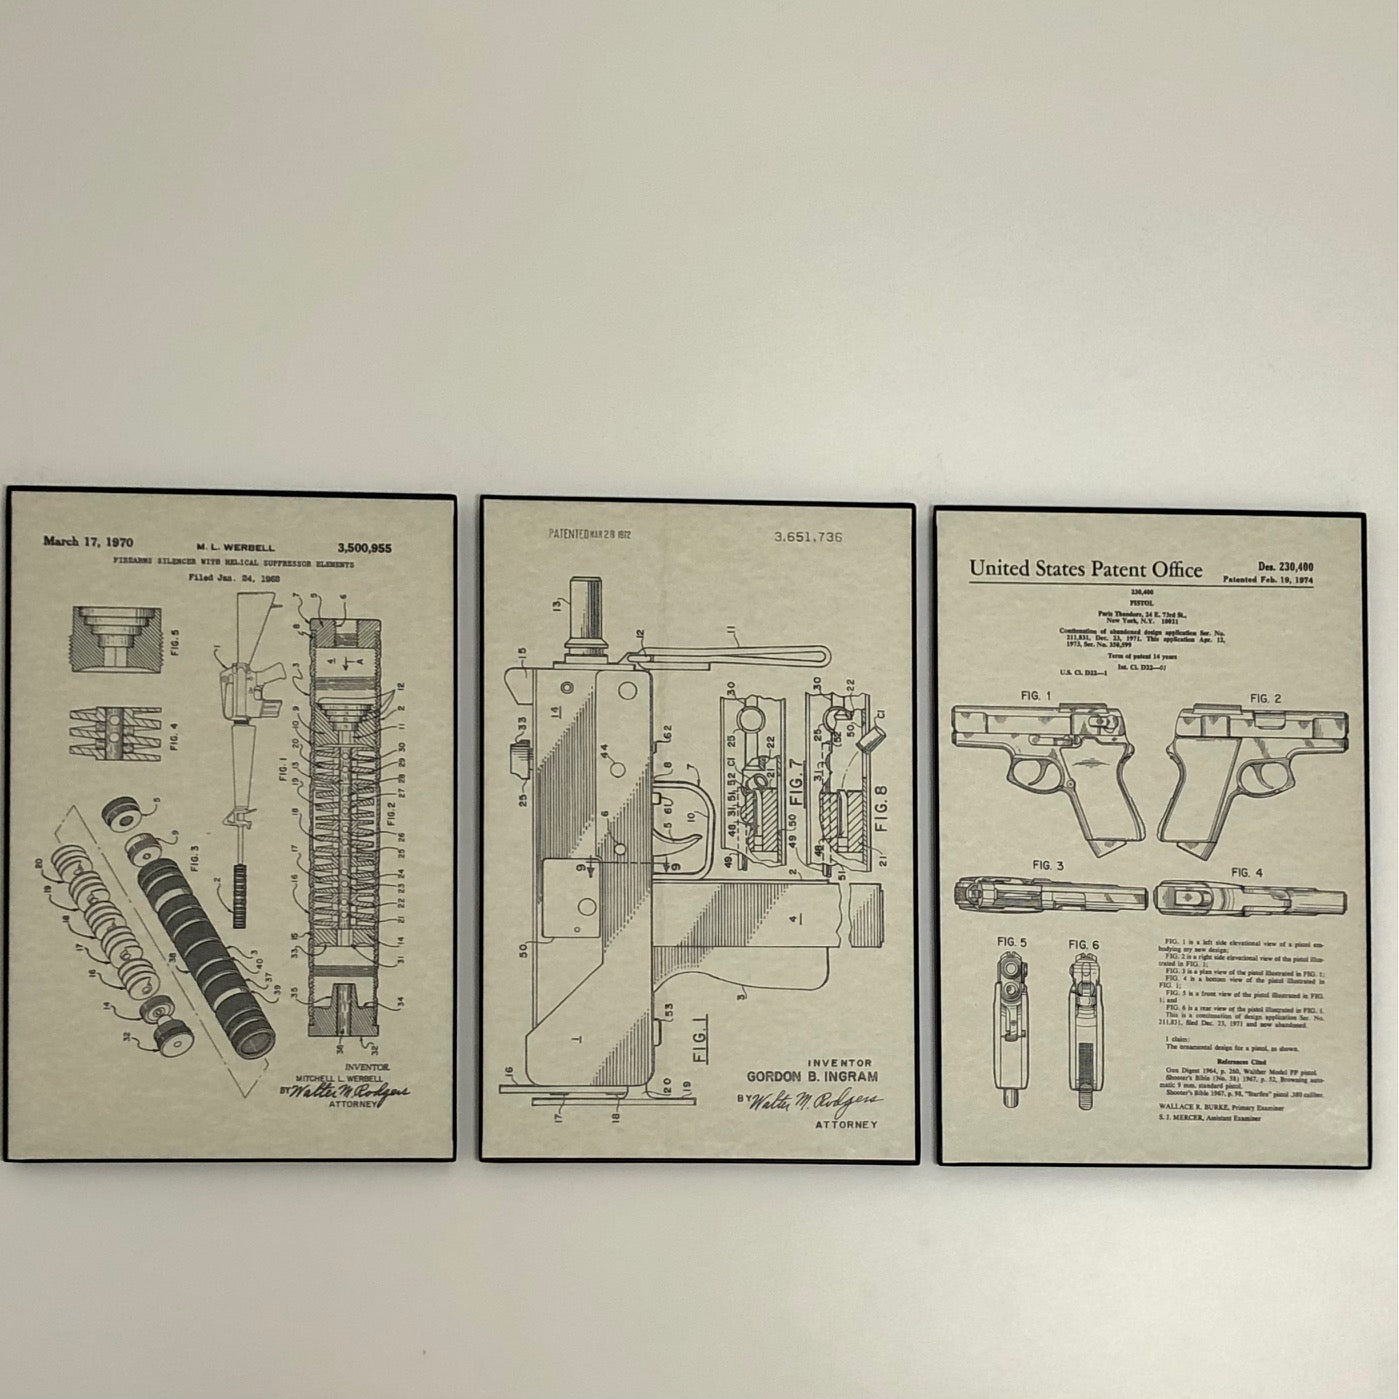 WerBell Suppressor Patent Poster | Posters Prints & Visual 